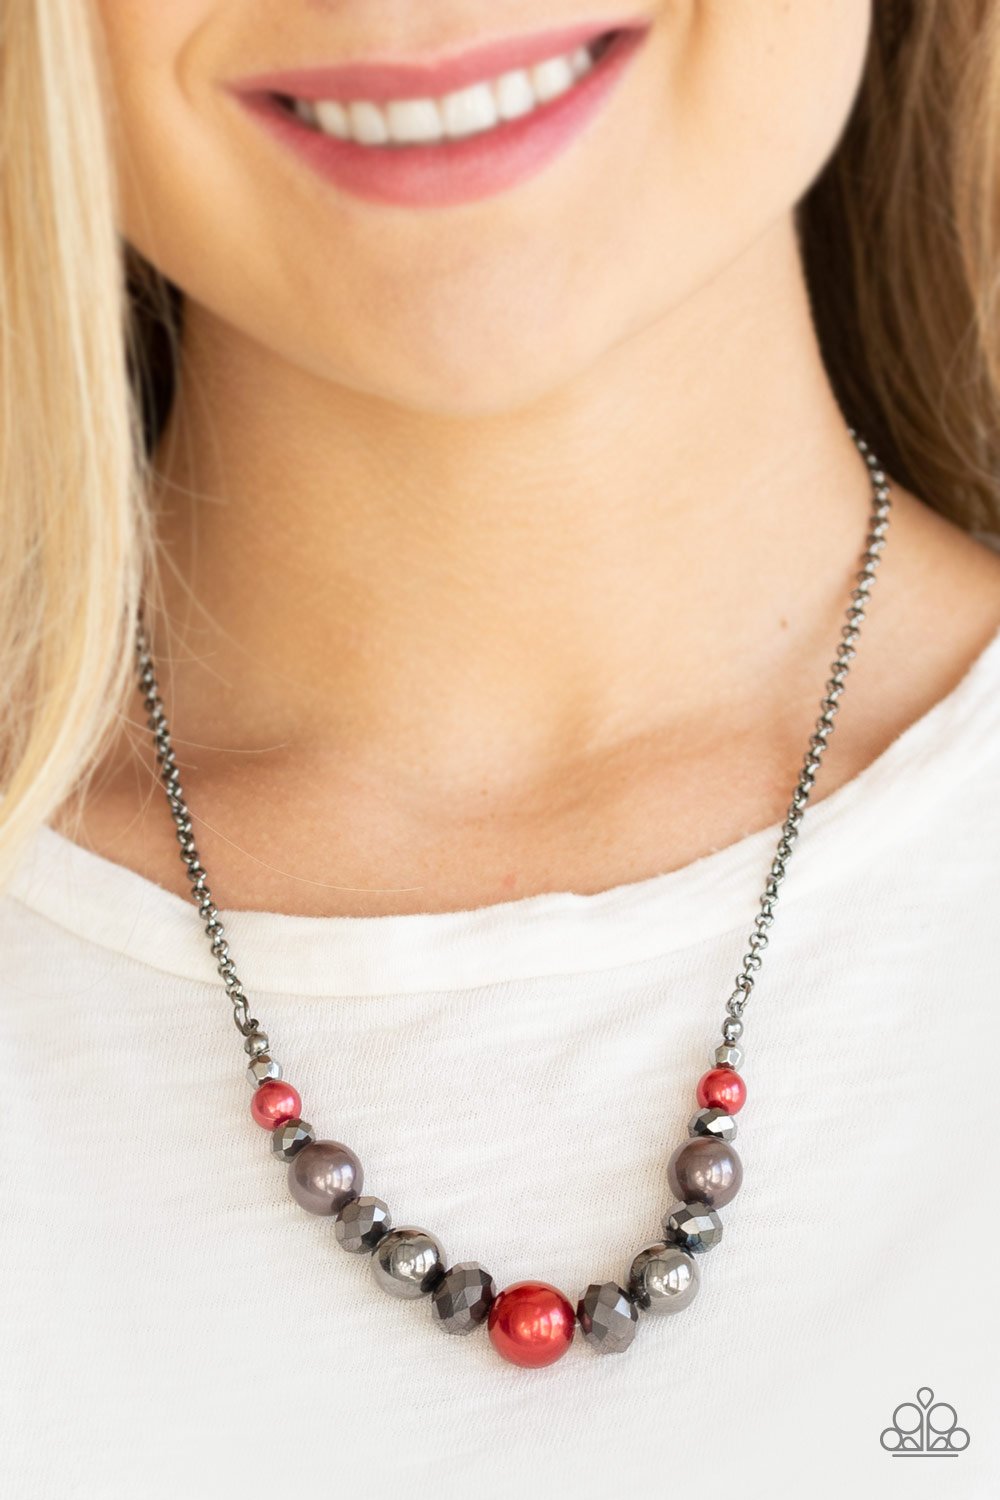 The Big-Leaguer - Red/Gunmetal necklace